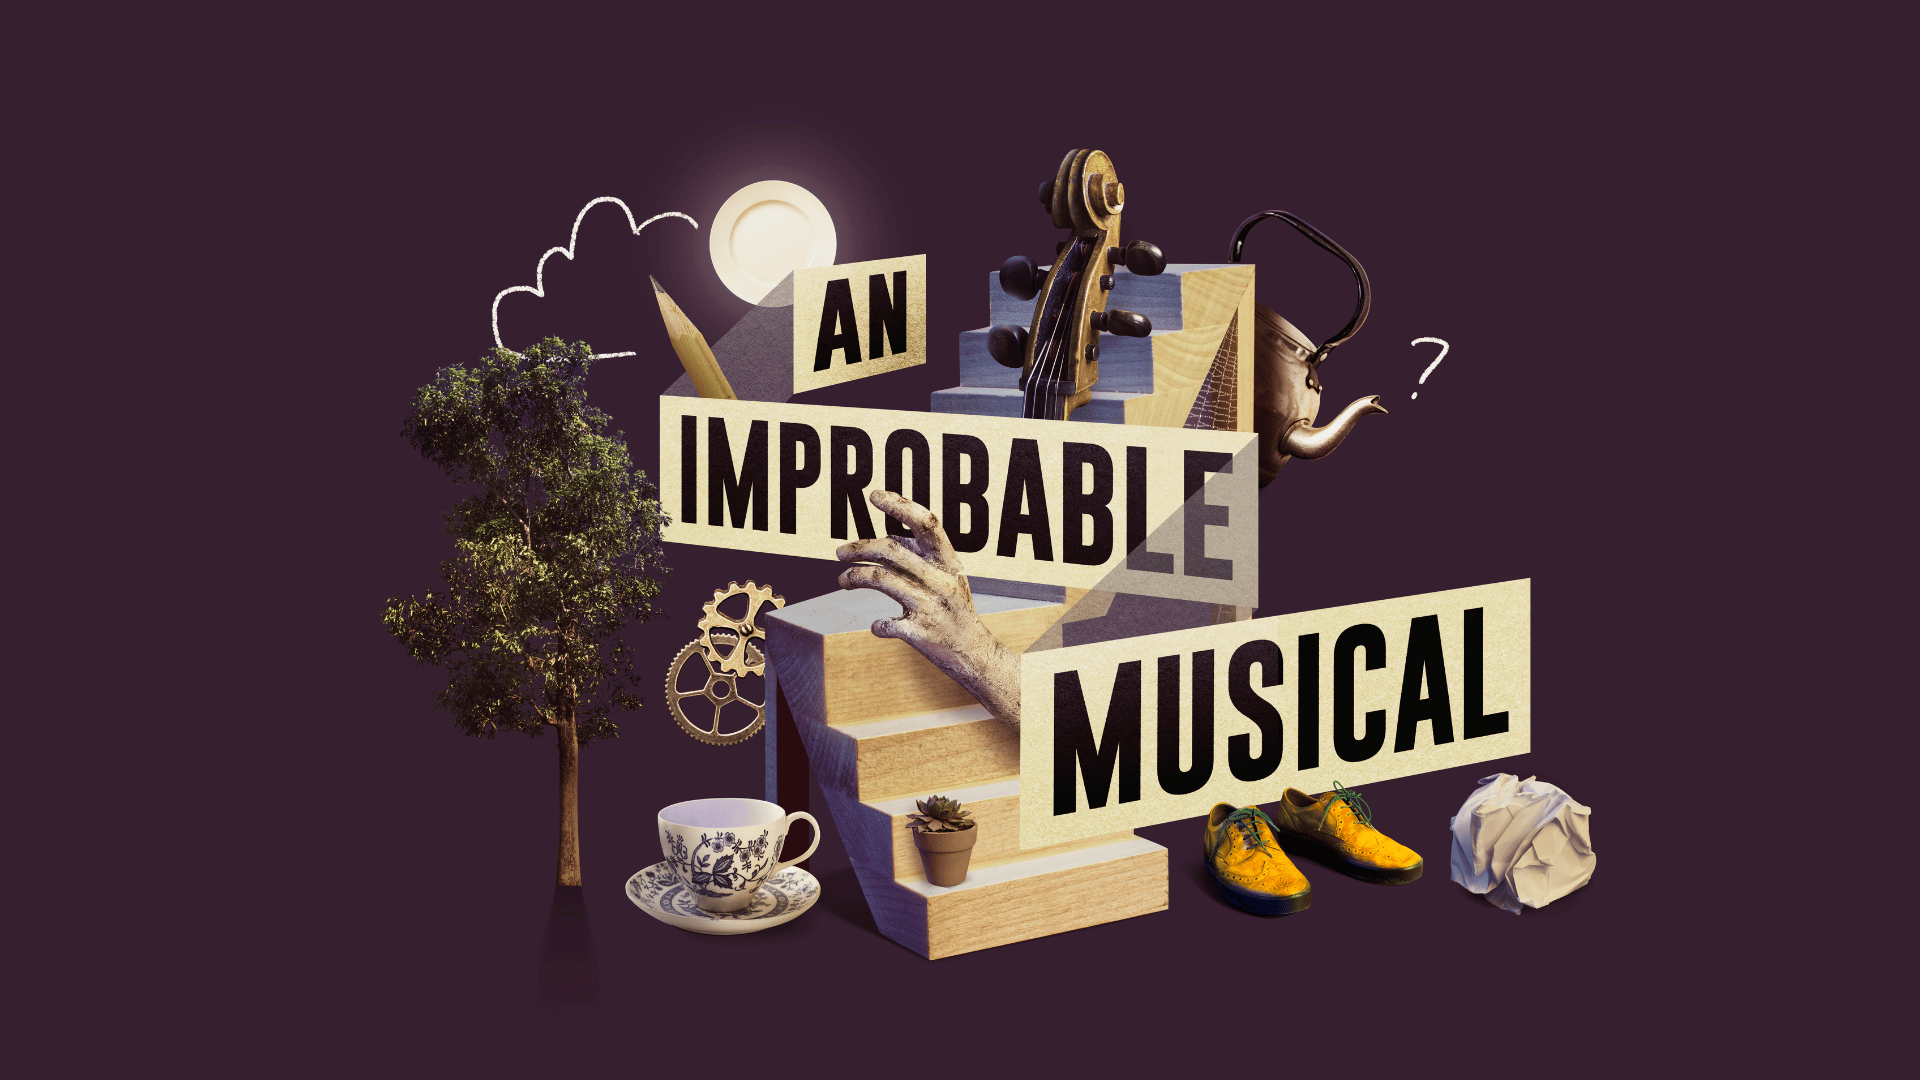 Improbable Musical title treatment